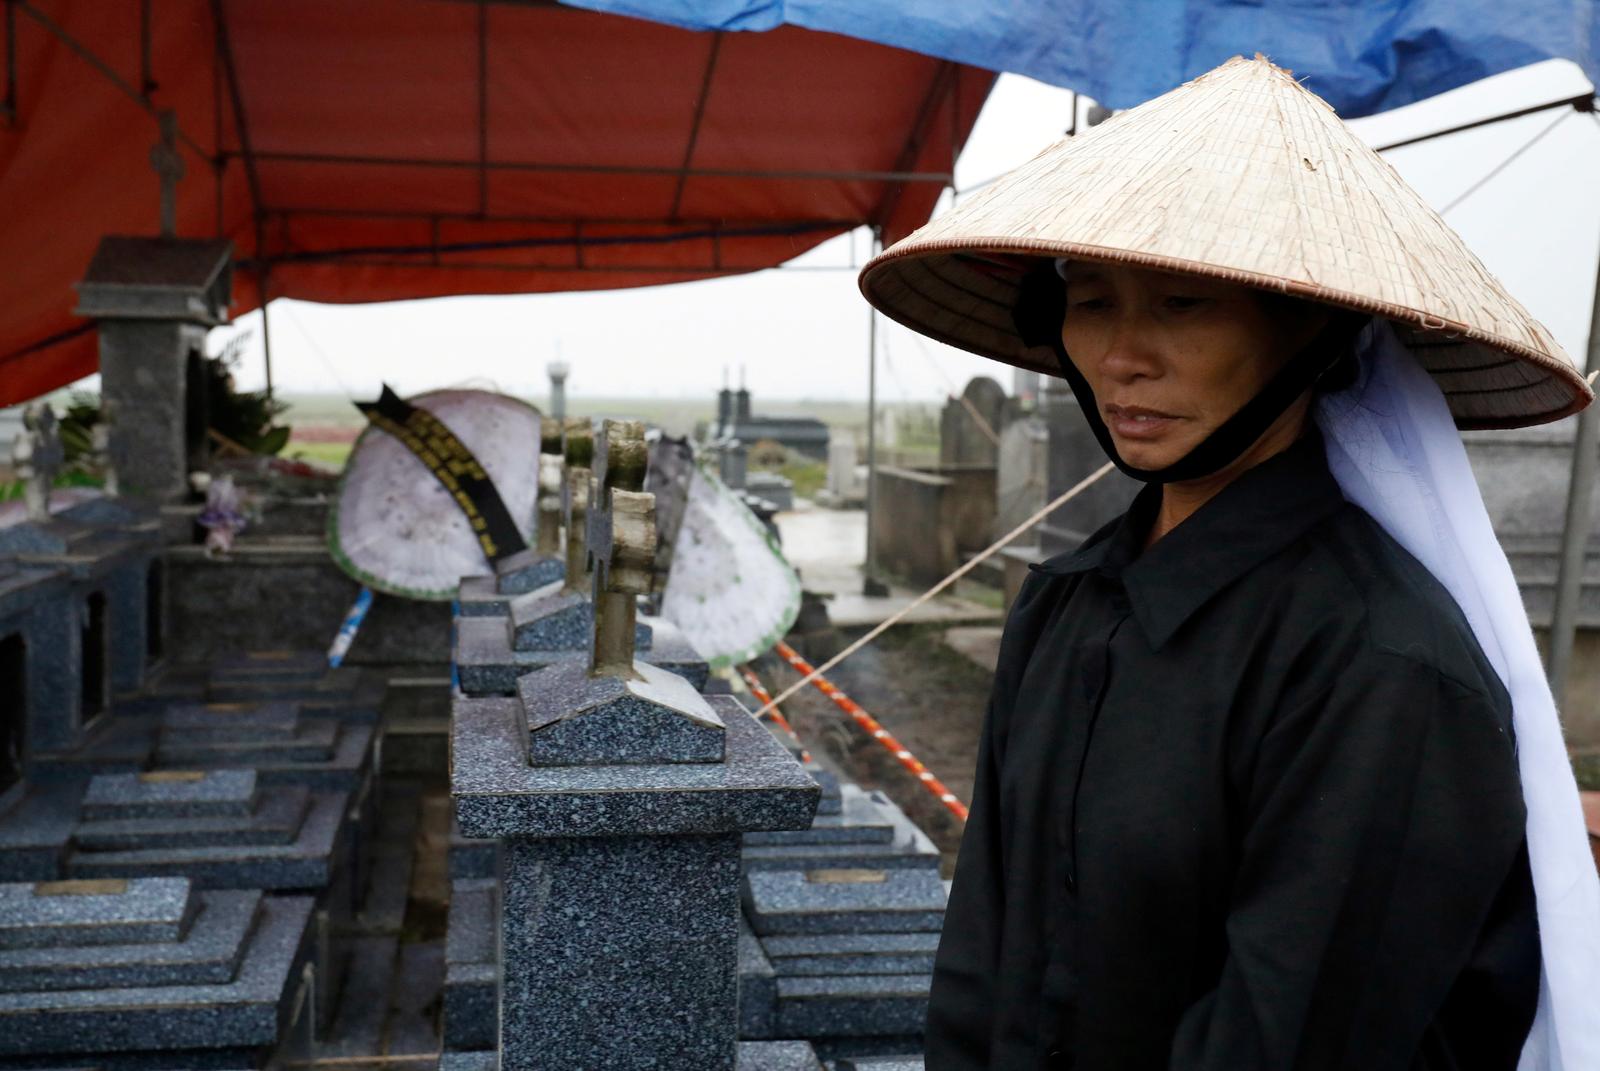 From a box to a coffin: The long and deadly road home for Vietnamese migrants